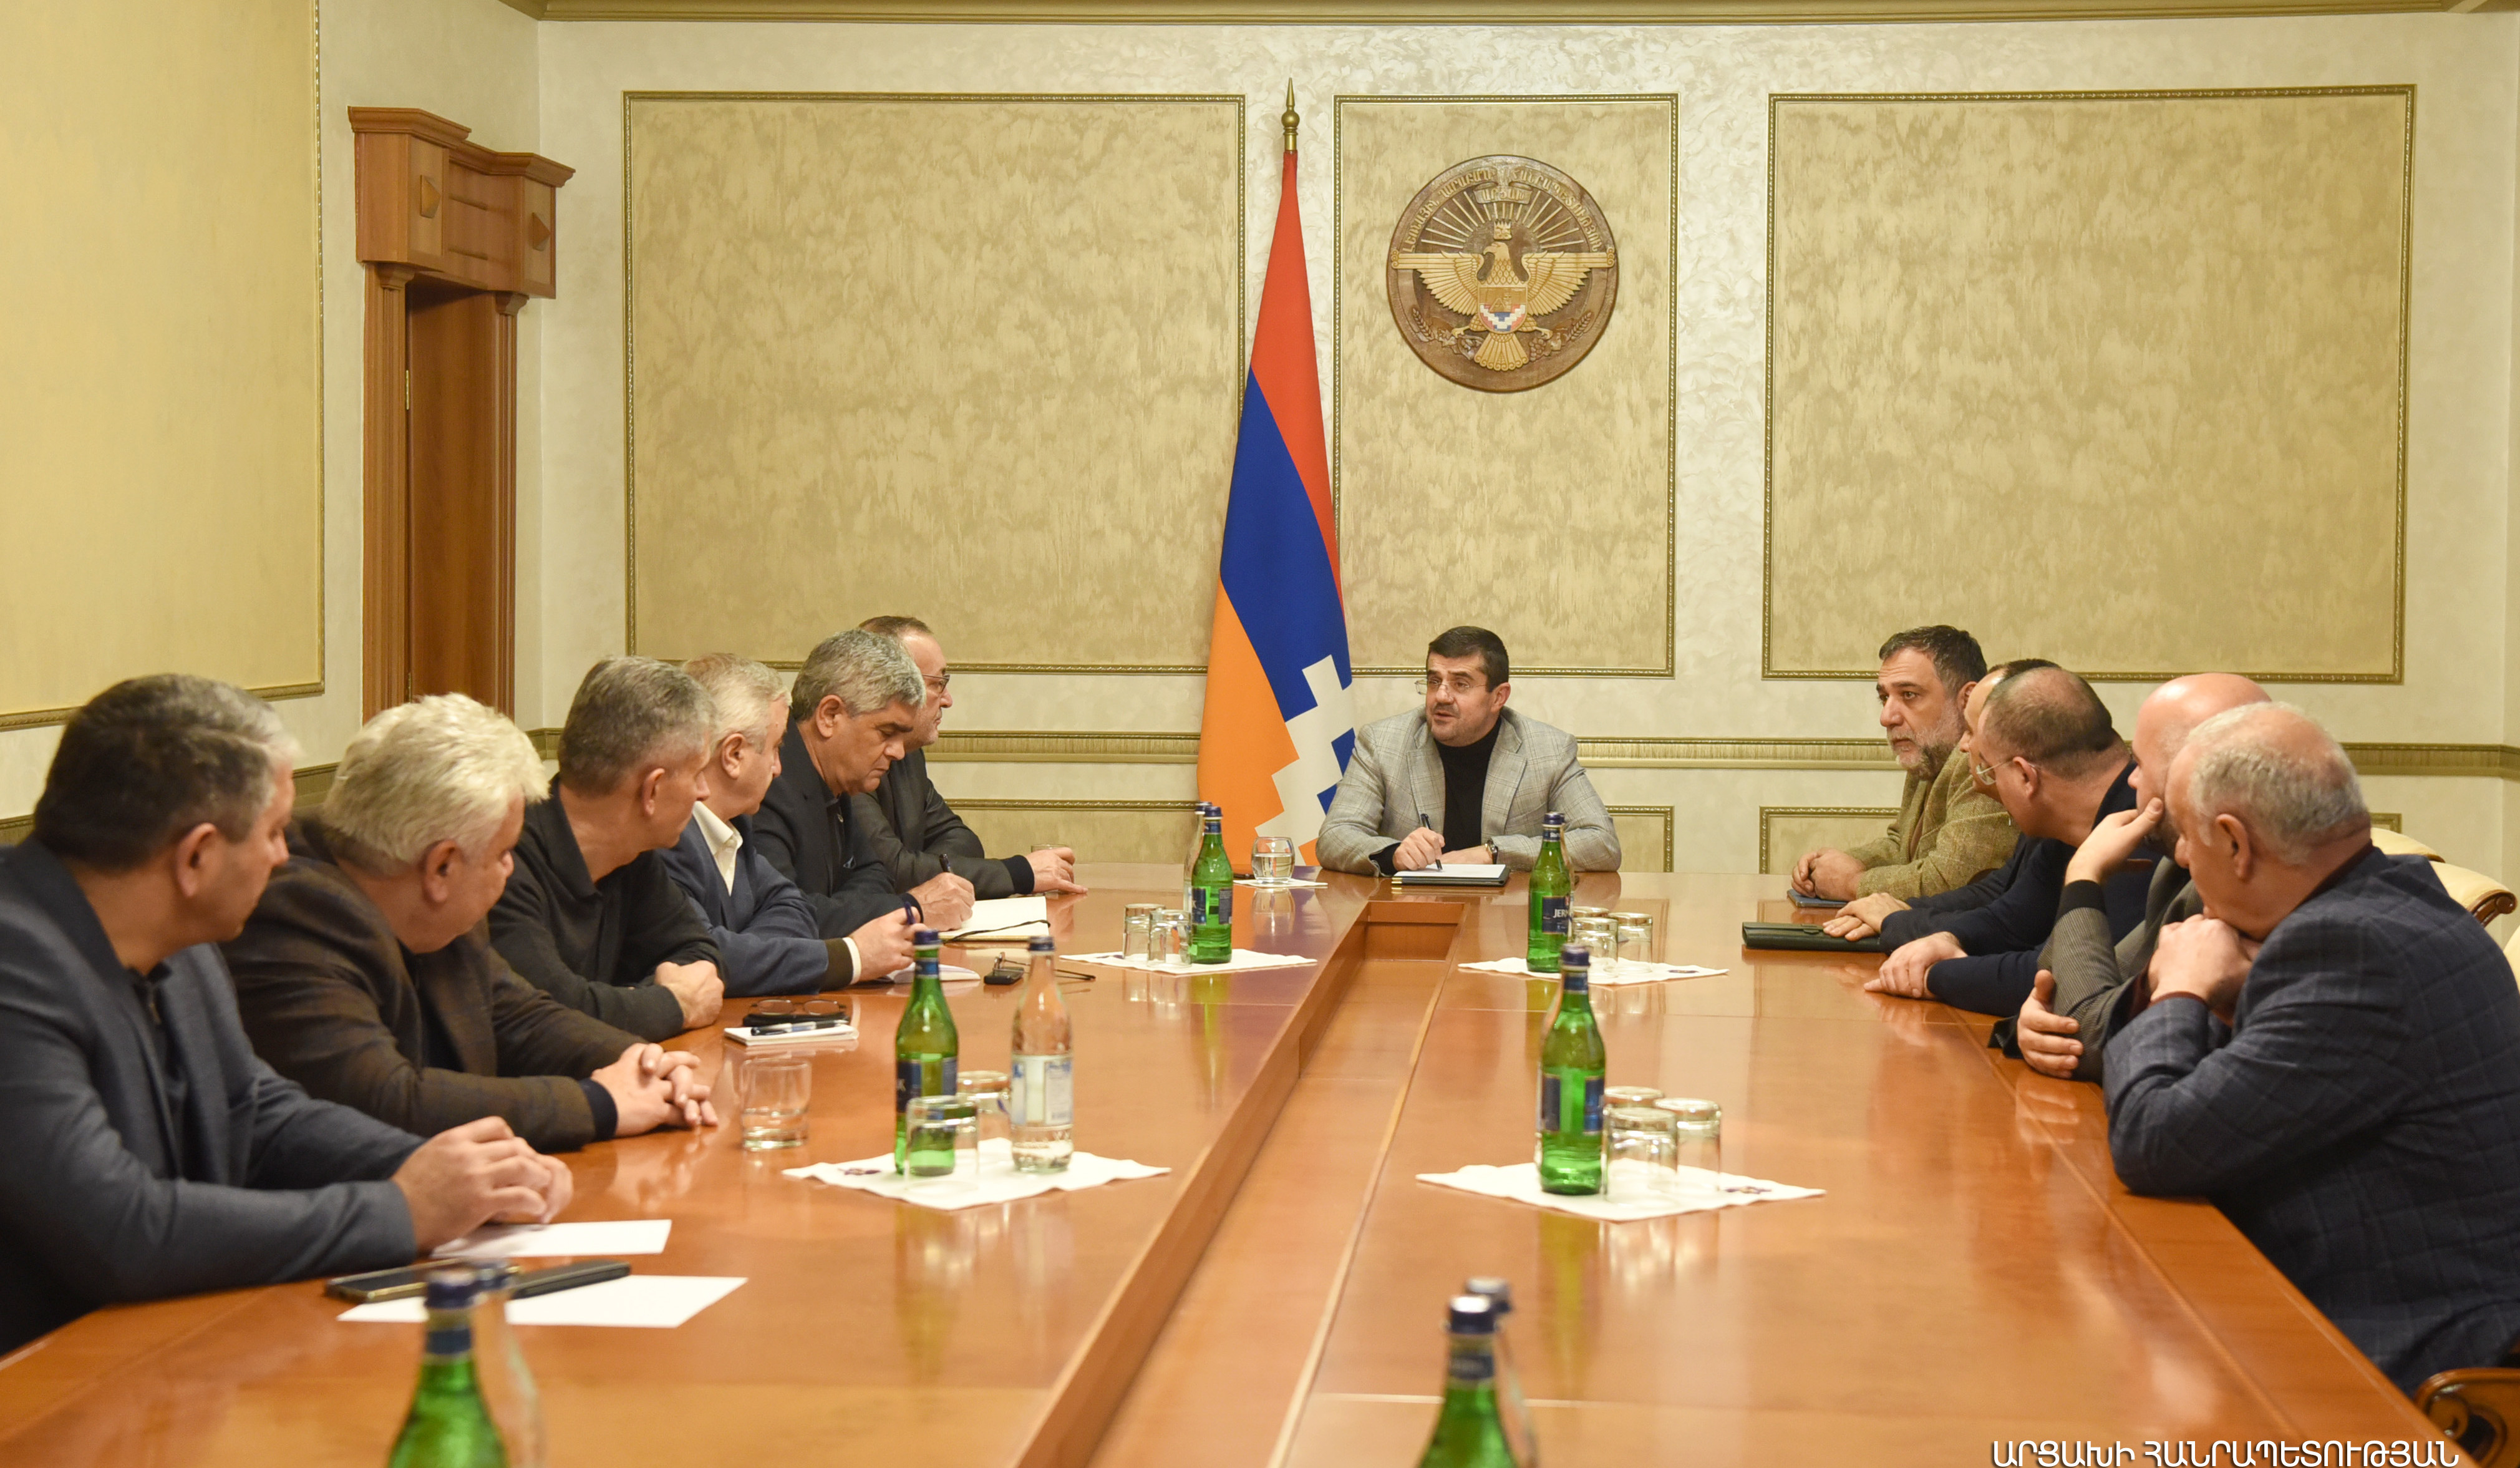 Military-political situation around Artsakh discussed: consultation with President of Artsakh